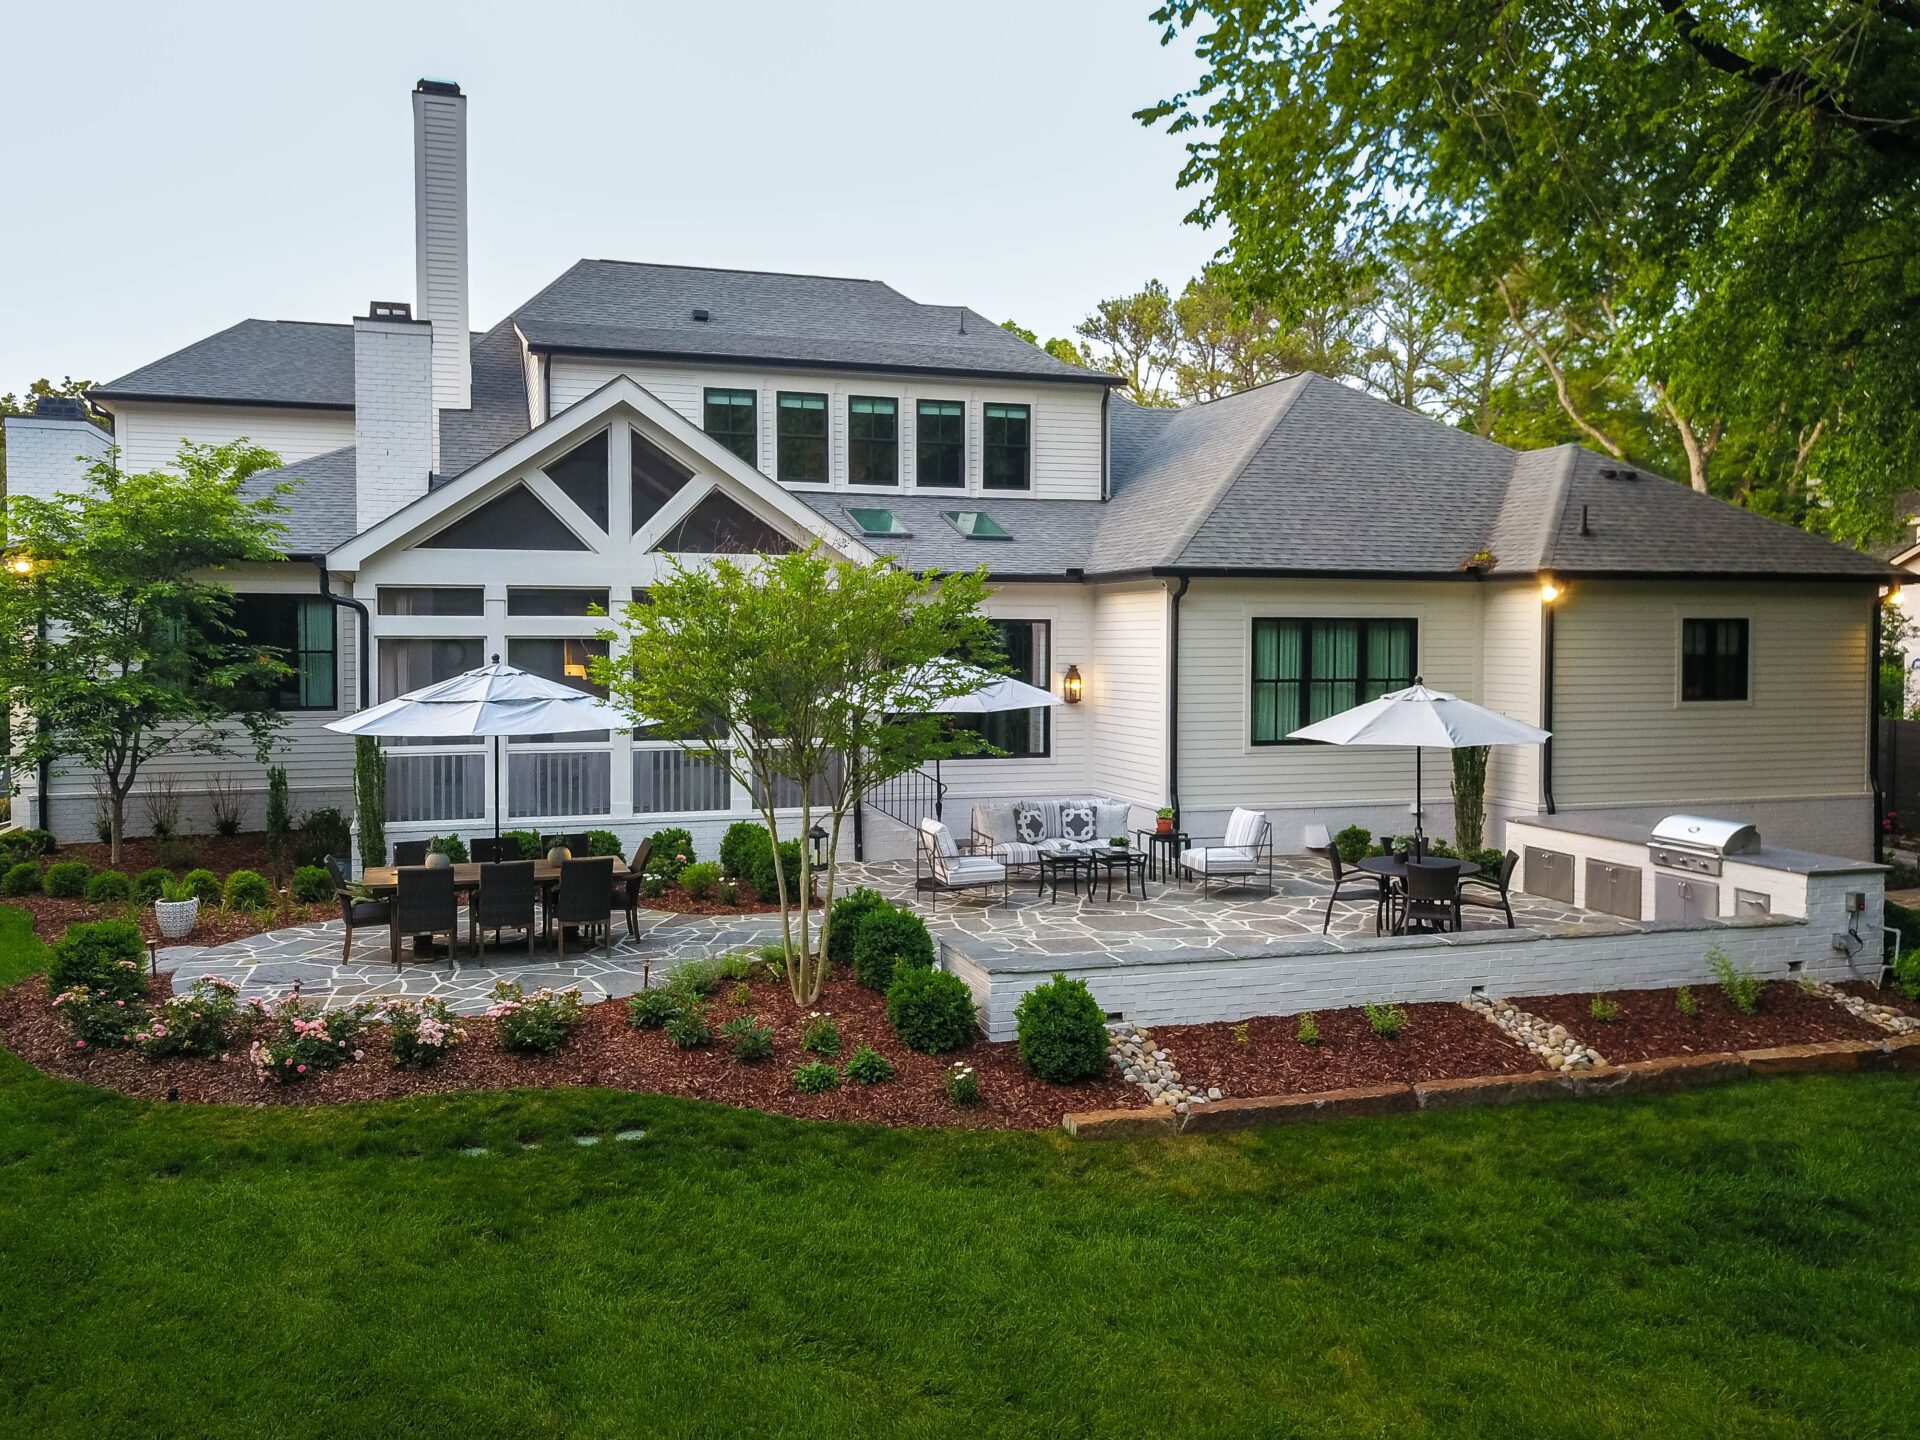 Nashville landscaping that compliments luxury home